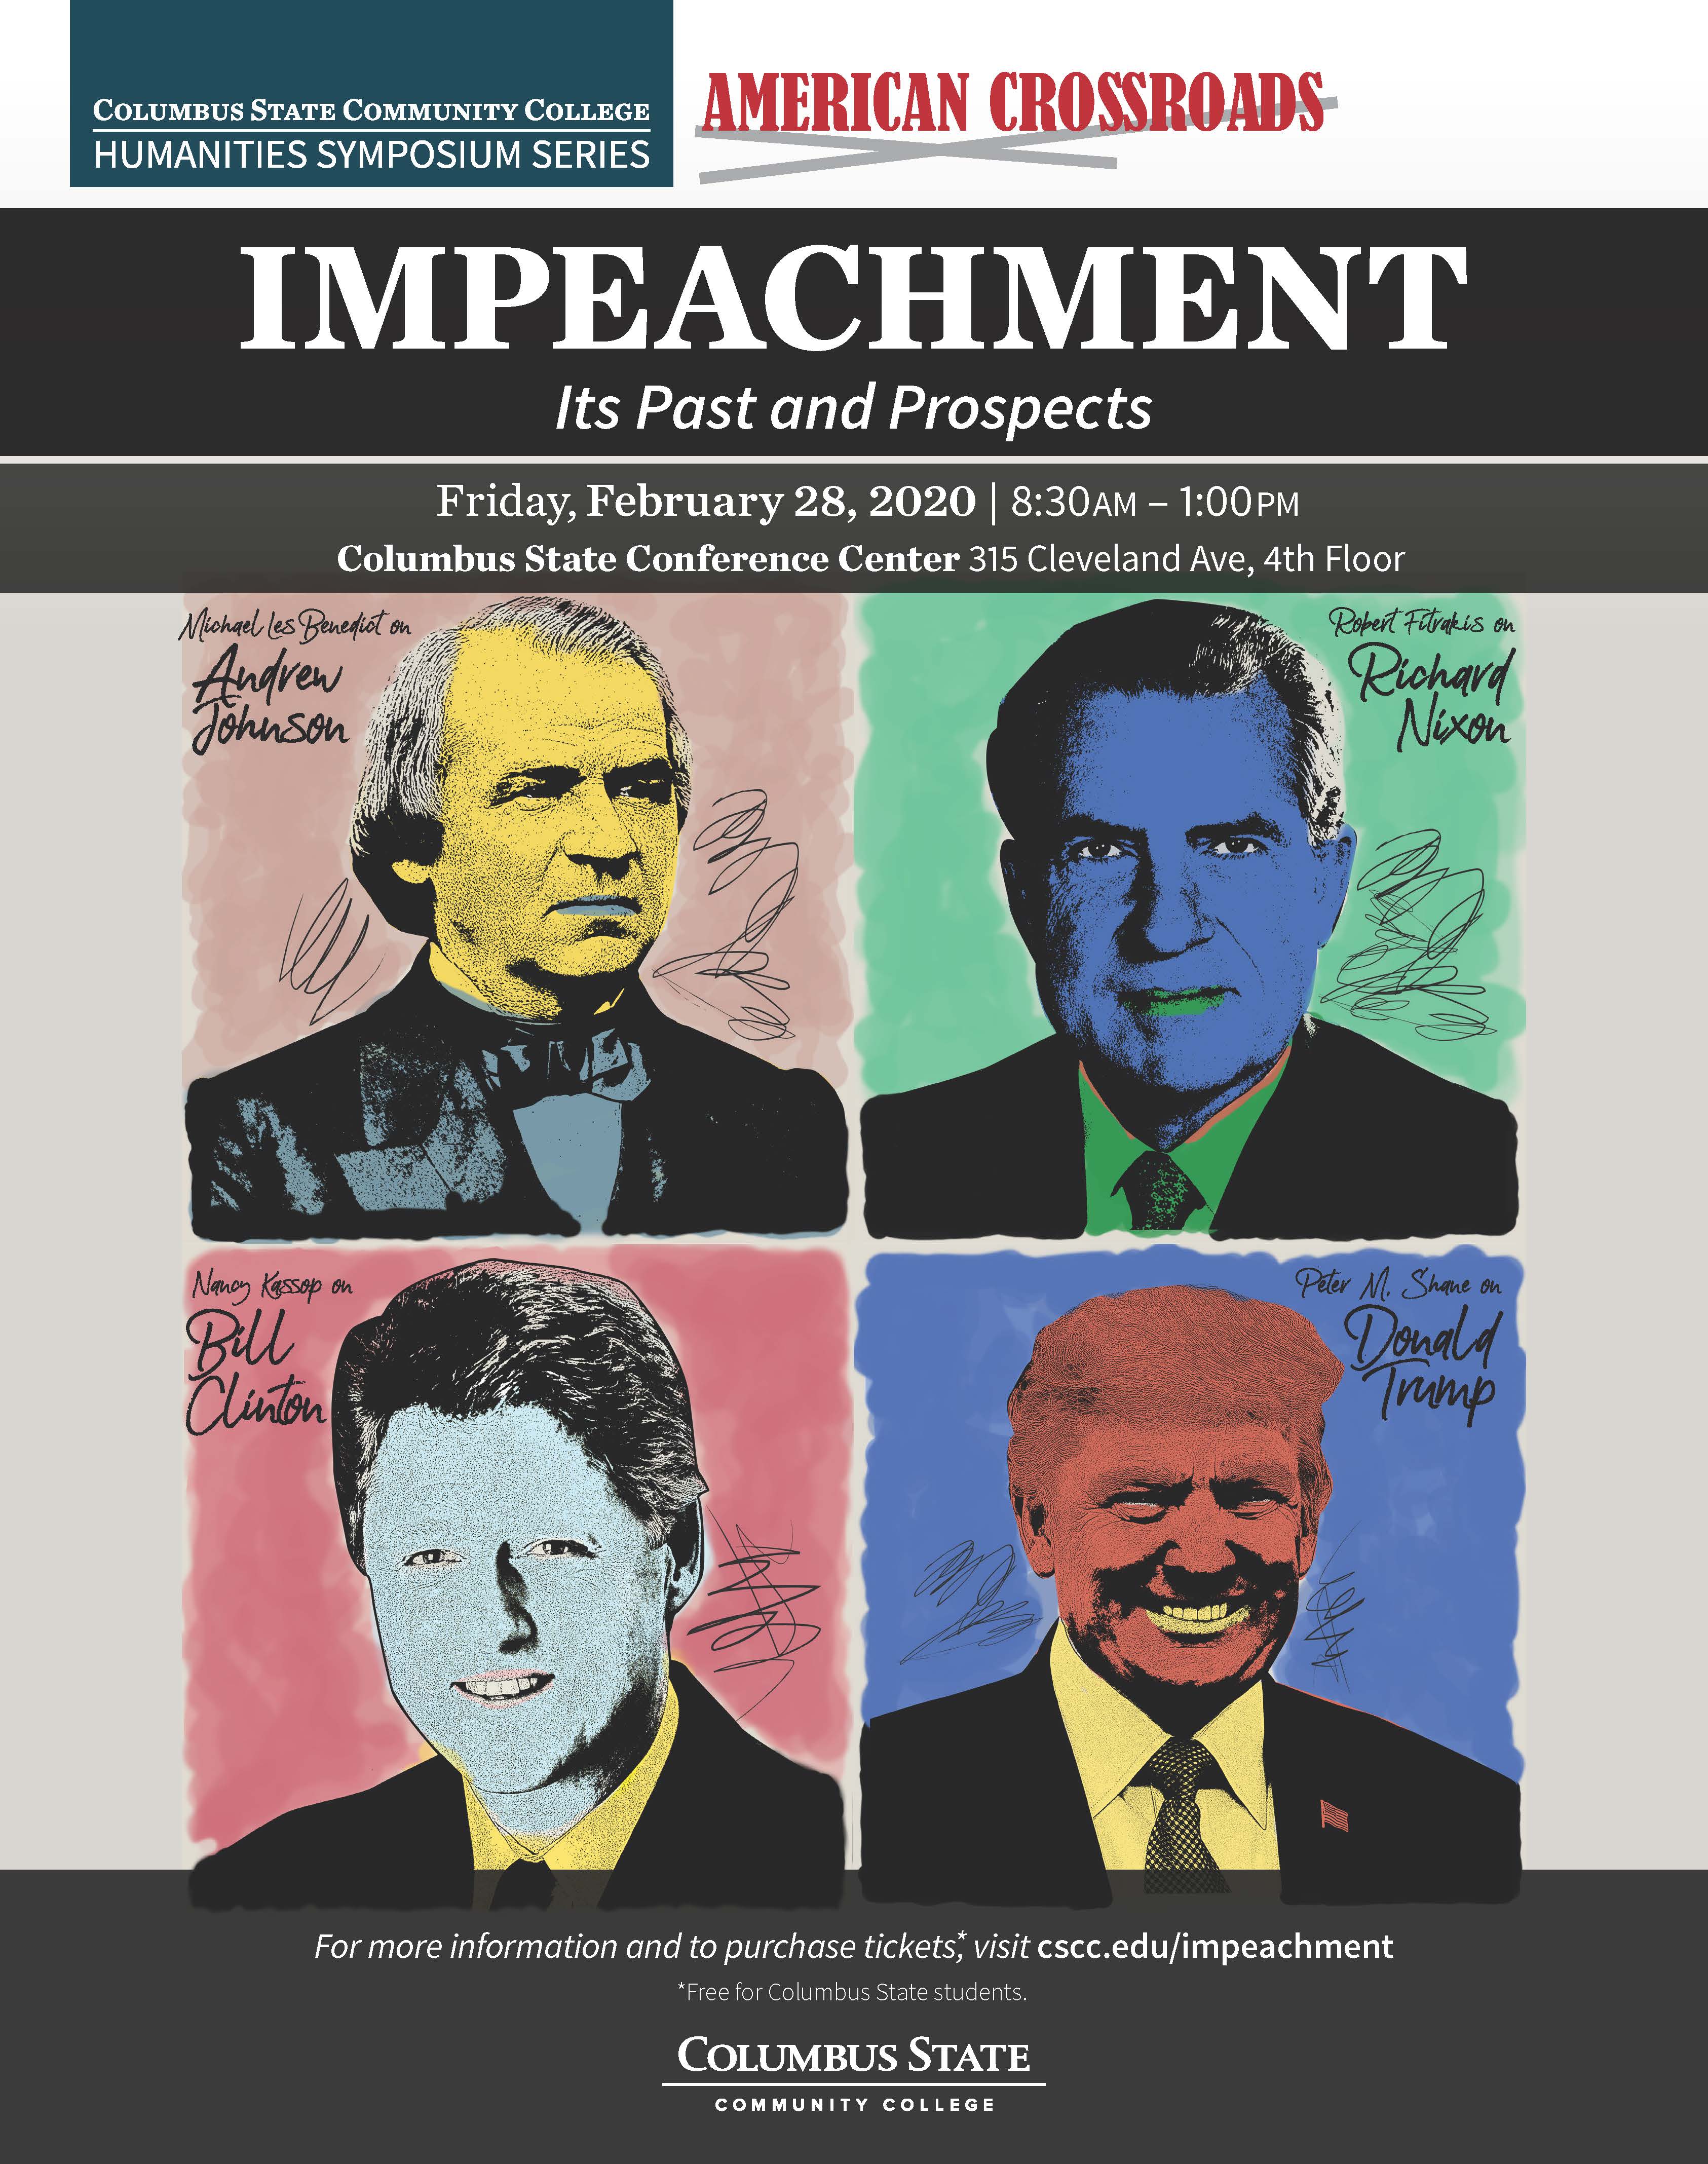 Picture of the poster with the four presidents being discussed at the symposium.